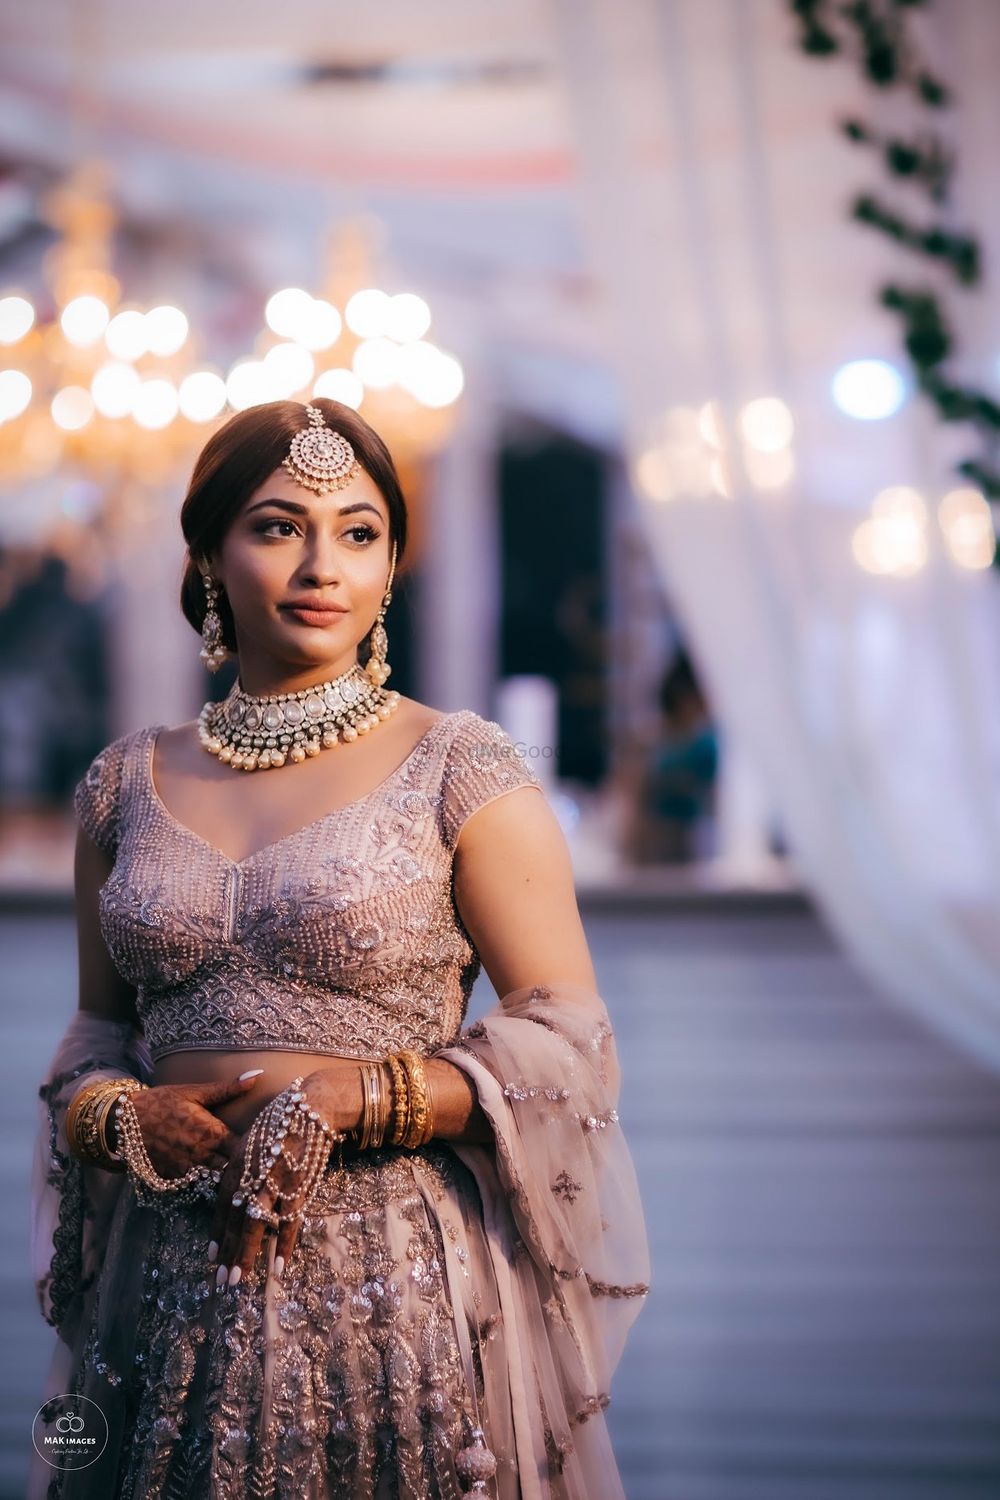 Photo of Bride dressed in an ivory and silver lehenga.